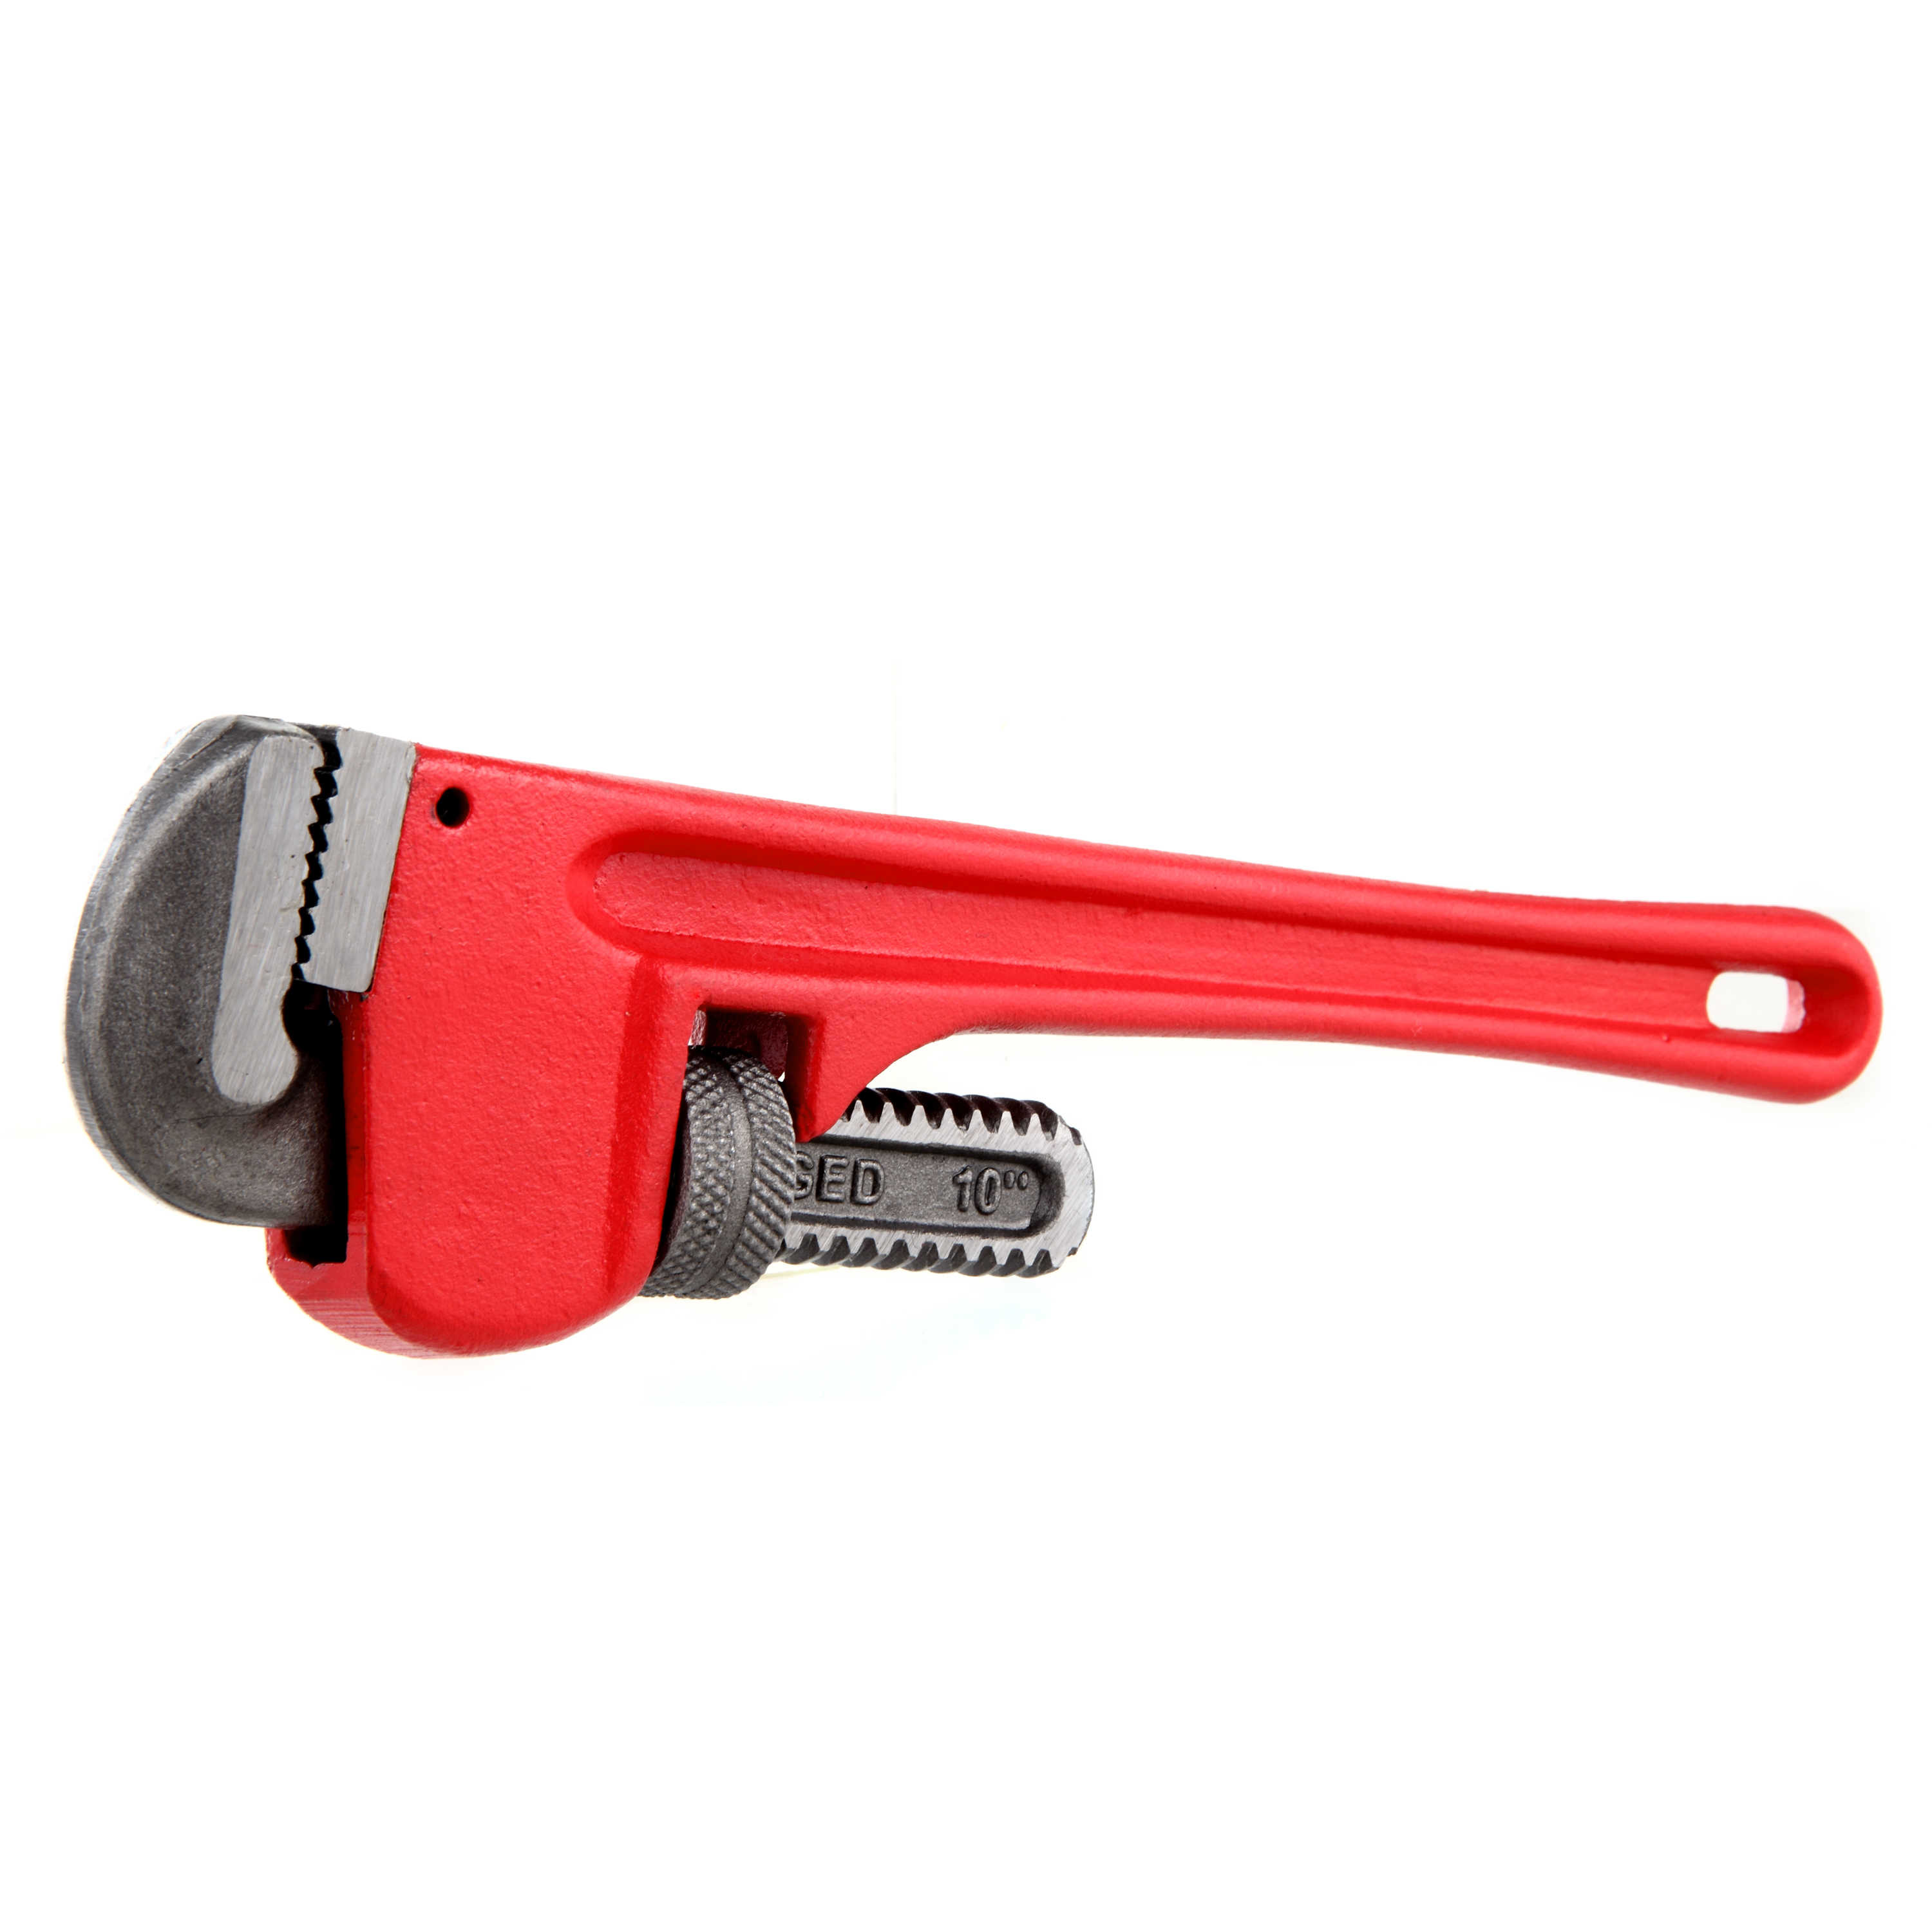 Hyper Tough UW40086A 10 Inch Cast Iron Pipe Wrench With Offset Jaws